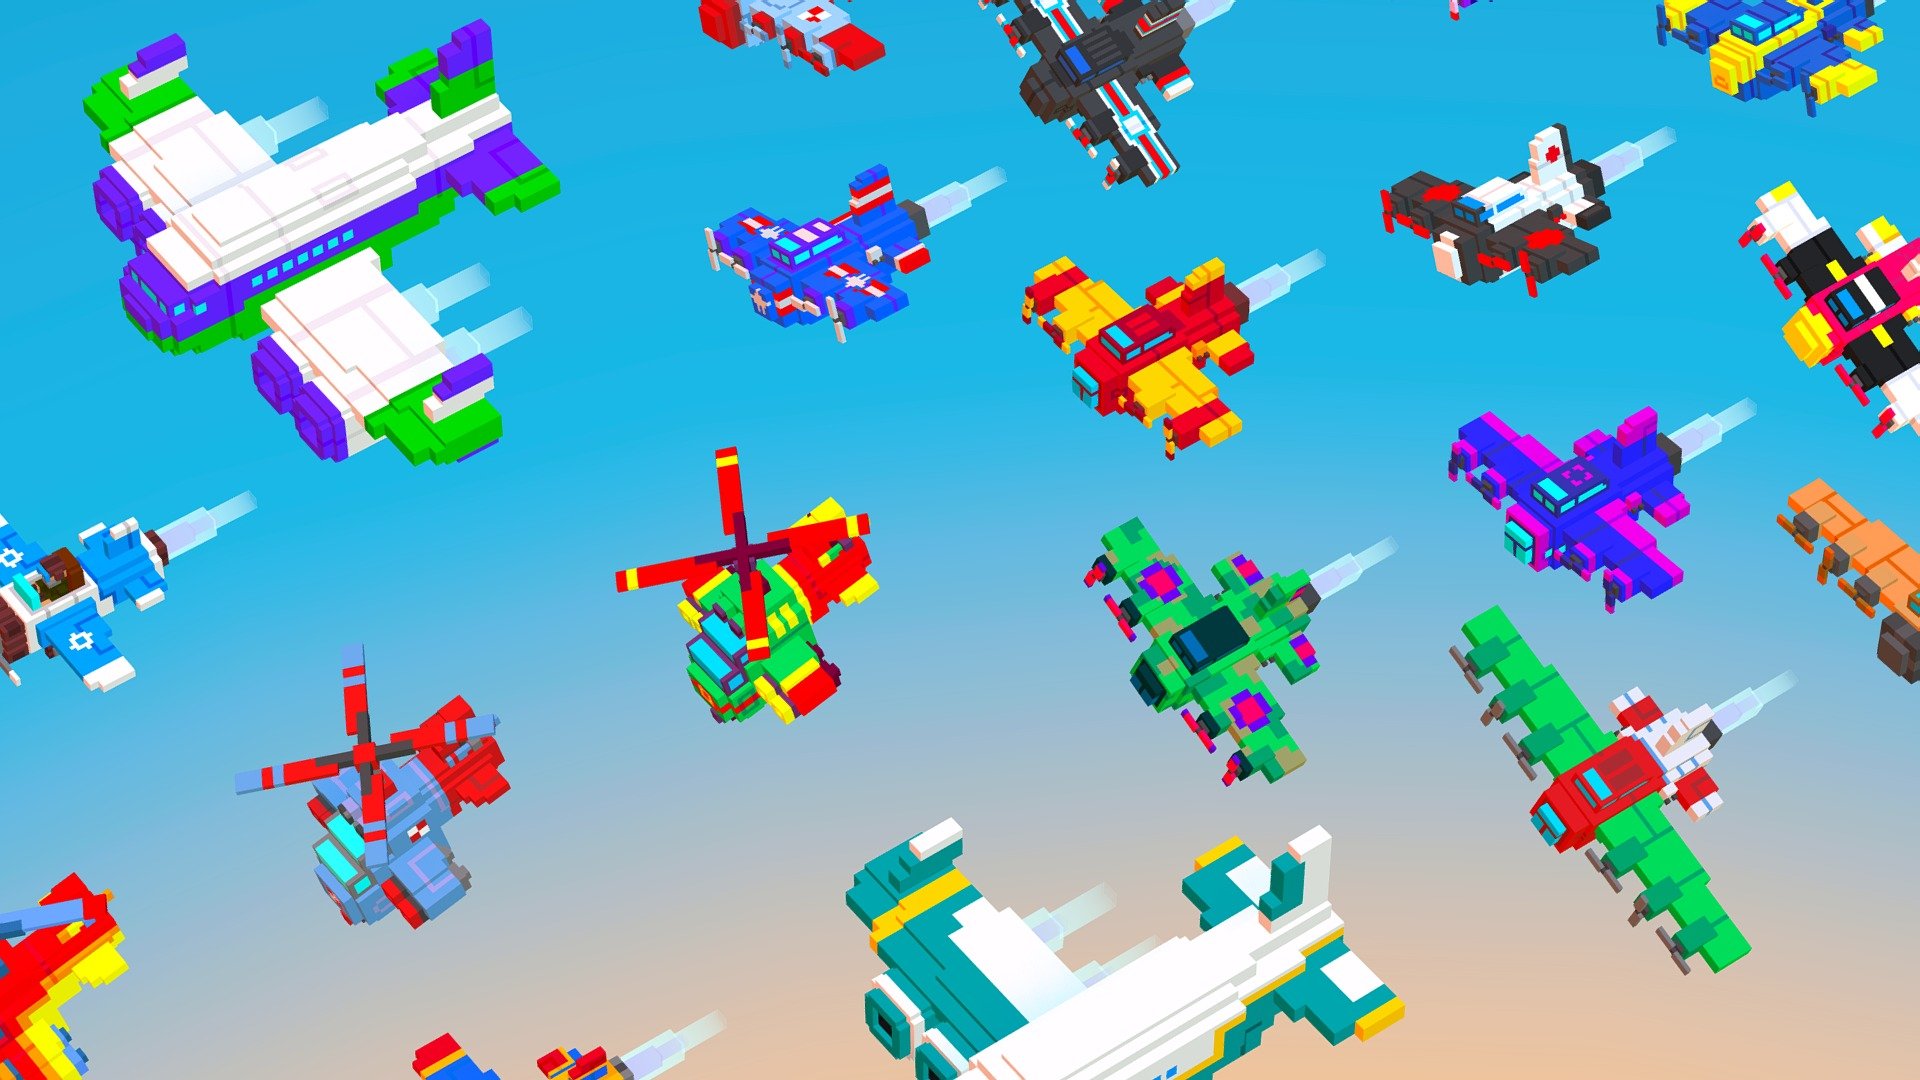 Collection of 37 Detailed, Unique Voxel Aircrafts which can be easily integrated into your game!

Archive contains: (MagicaVoxel) file .vox; .obj + .mtl; .fbx; texture palette .png
+Flight animation

5 types of aircrafts:
B18 - 10
B17 - 20
Airbus - 2
Helicopter -3
Miniplane - 2 - Voxel Aircrafts Pack - 3D model by Vladimir Abashin (@UncleV89) 3d model